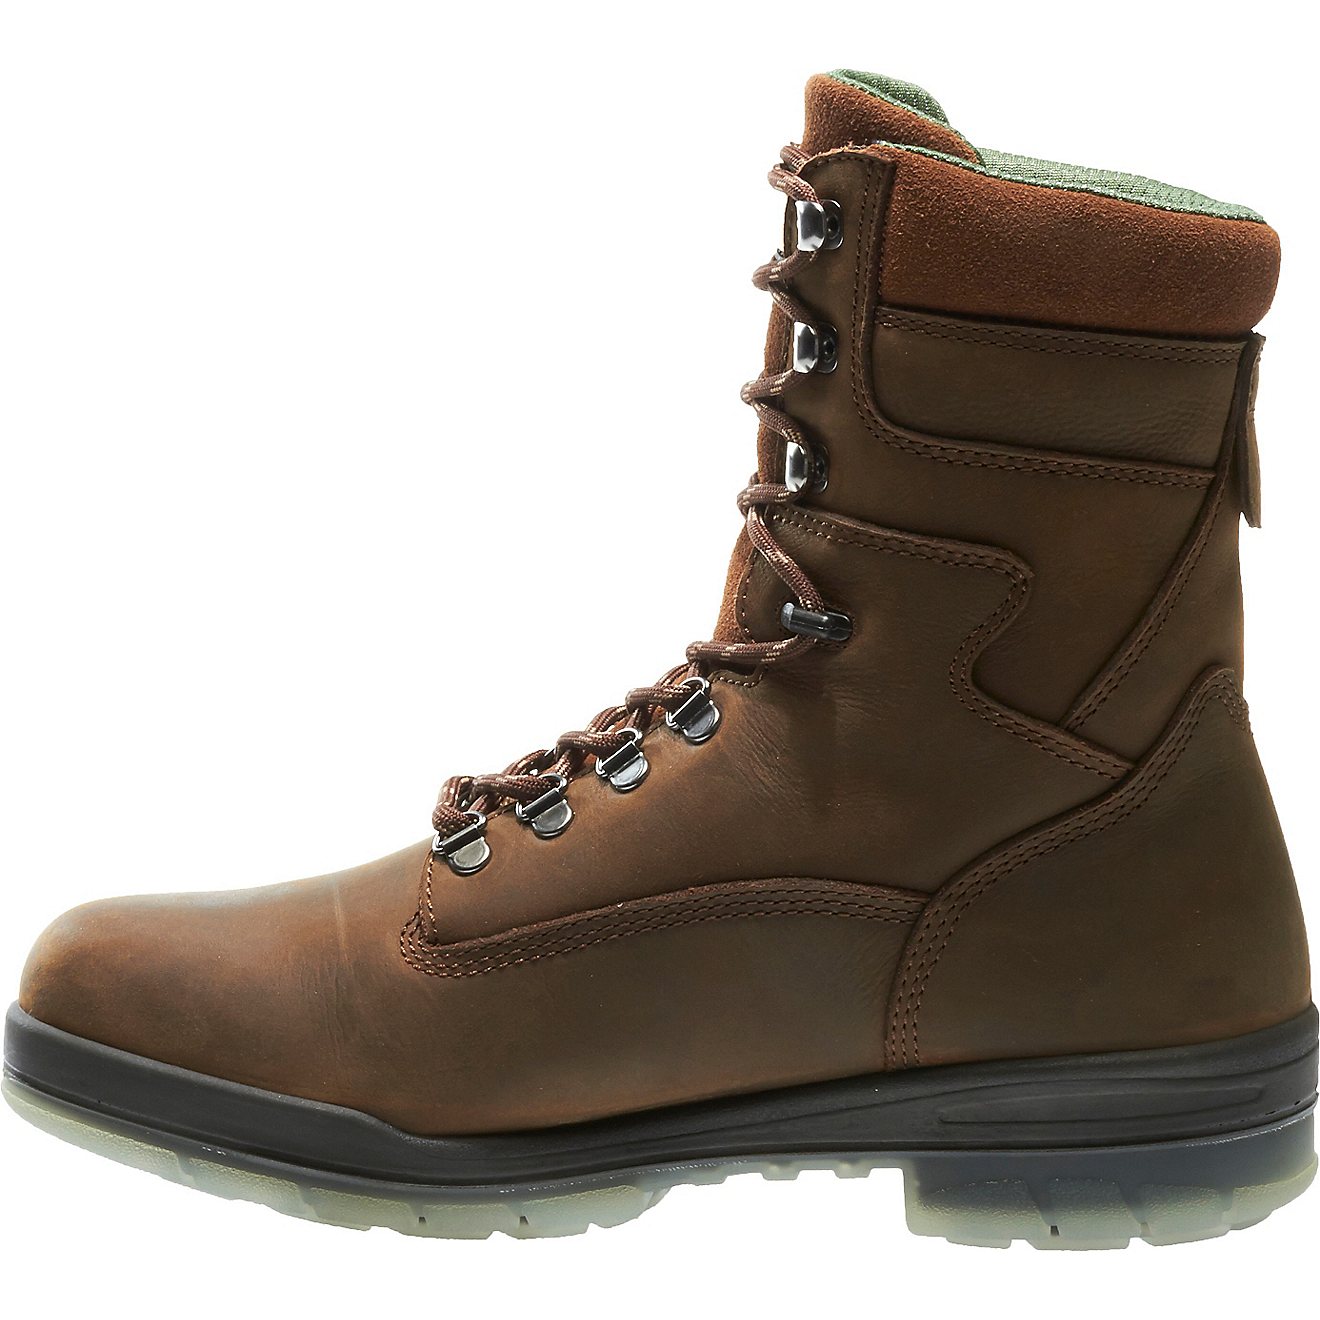 Wolverine Men's DuraShock Insulated EH Lace Up Work Boots                                                                        - view number 3